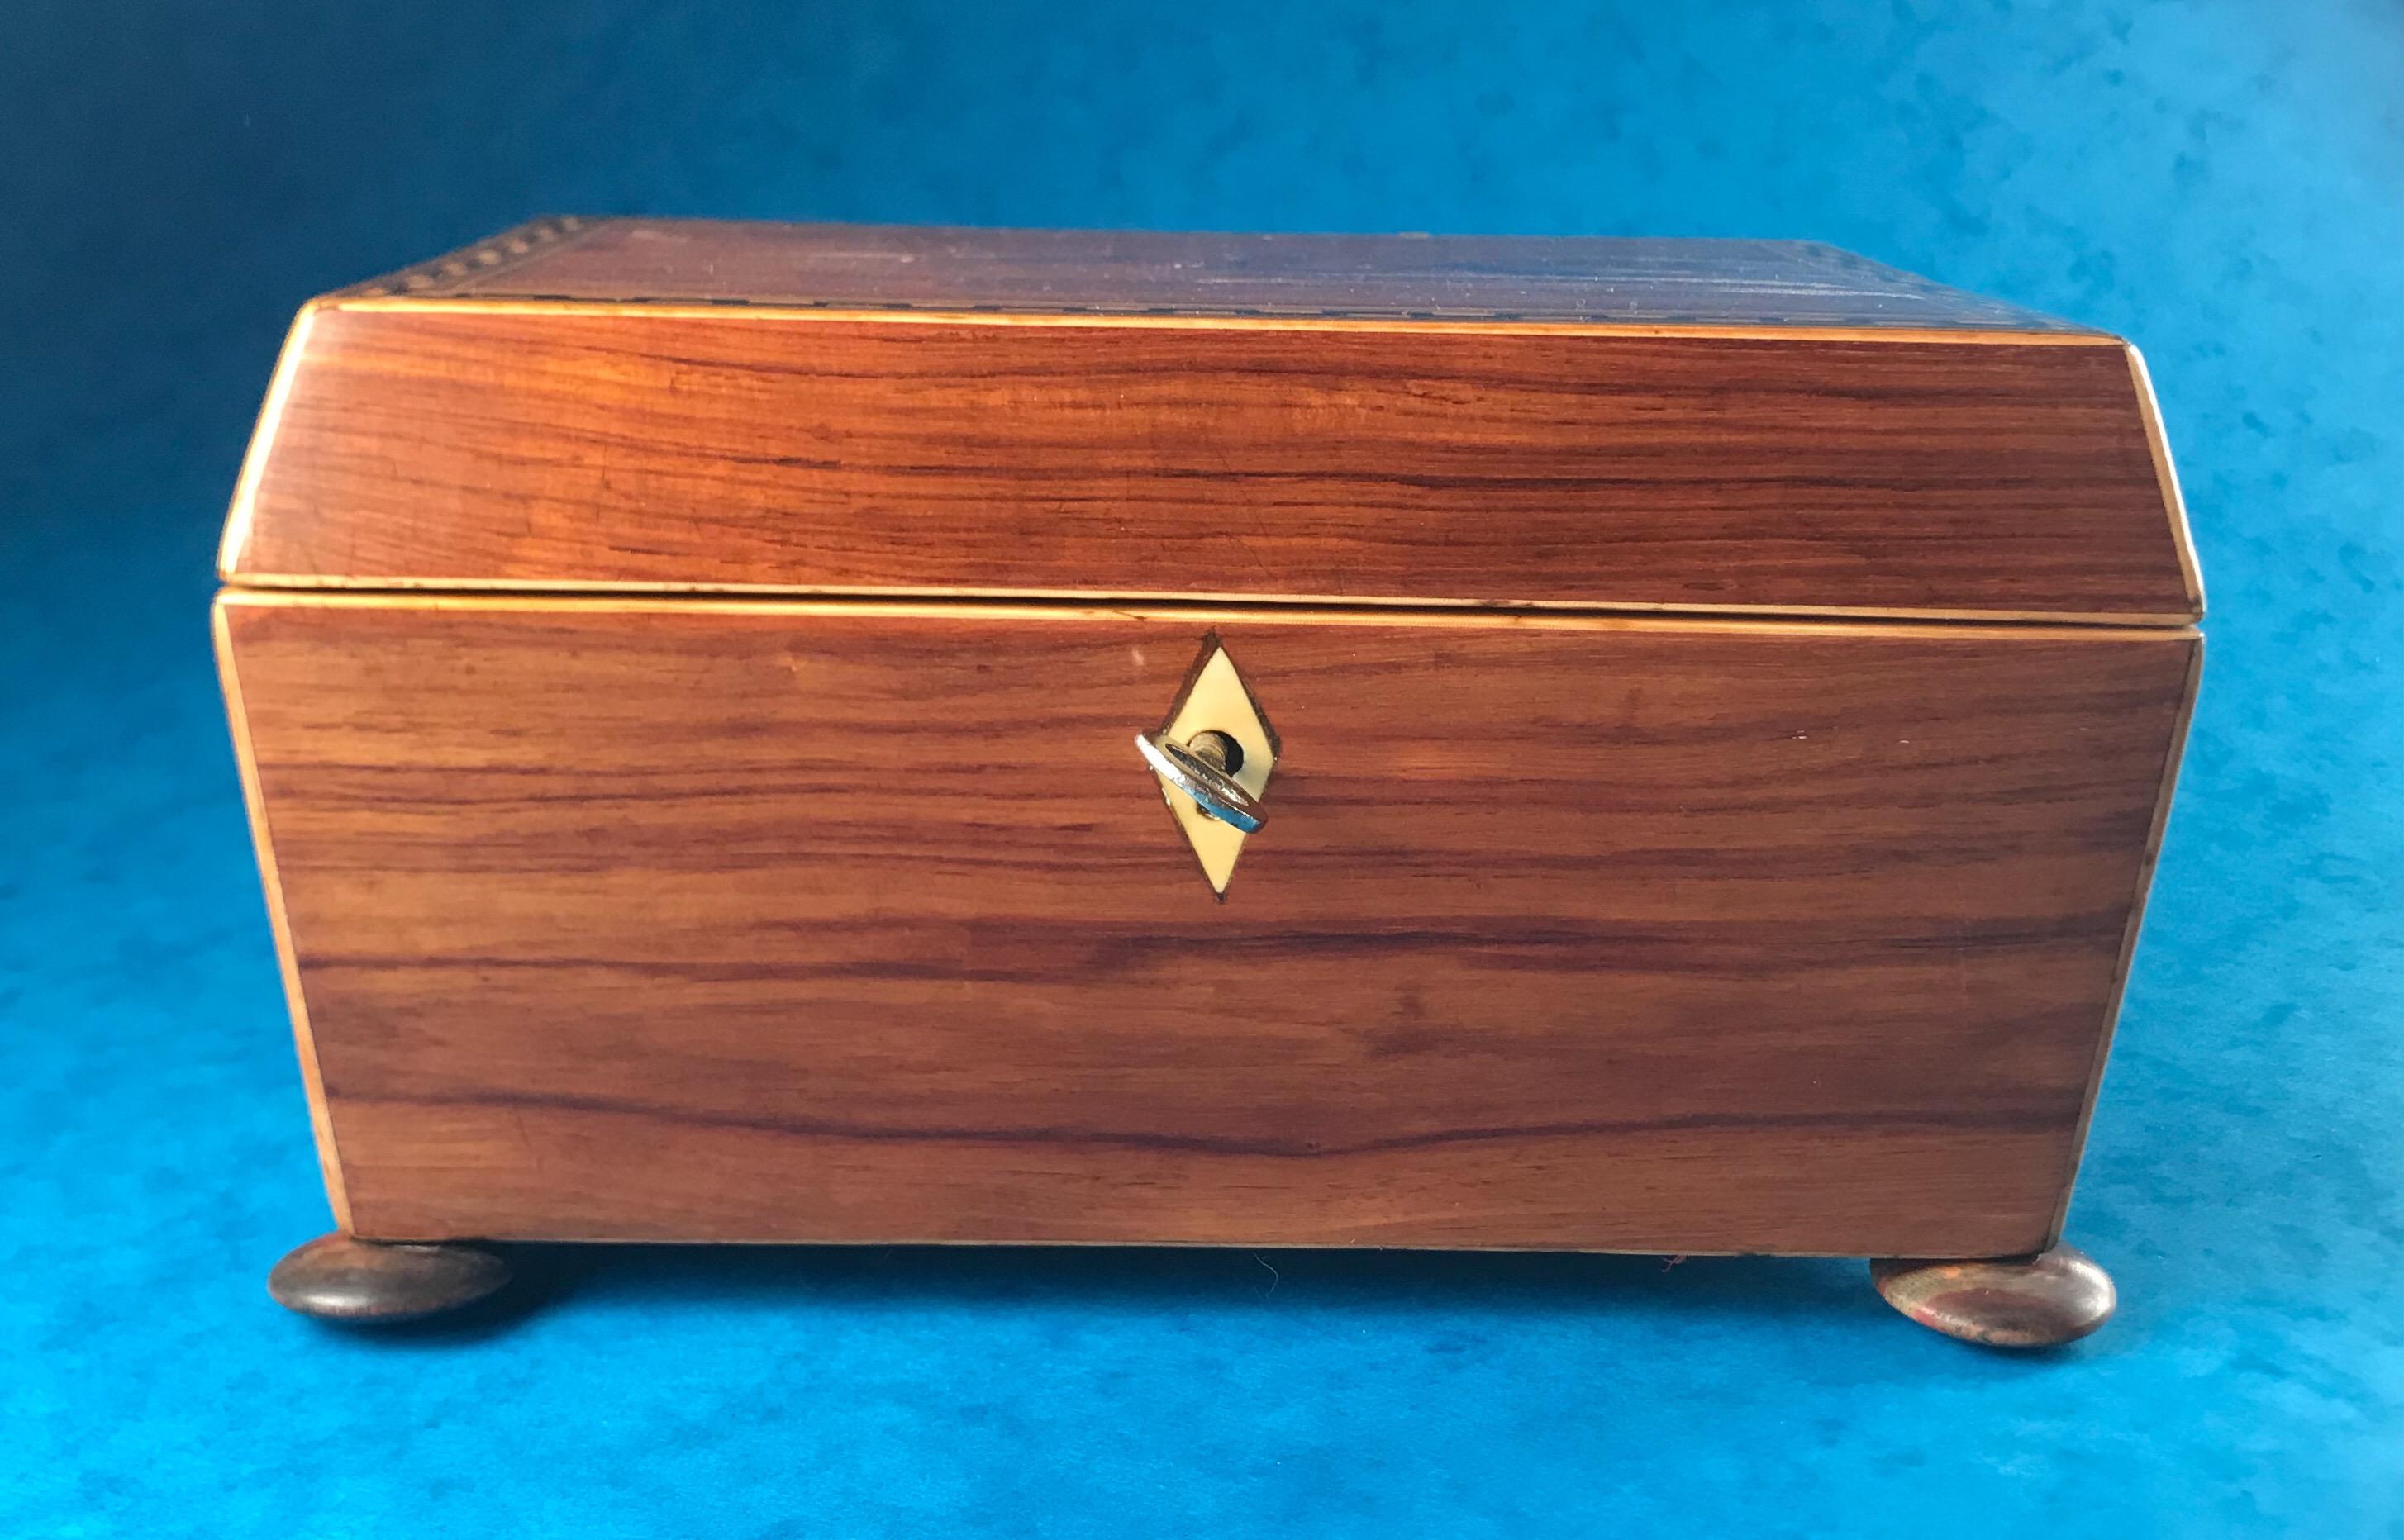 A Georgian 1820 Harewood, ebony and boxwood inlaid Tulipwood box, it sits on four tulip wood bun feet, it has a relined interior and its original tray, unfortunately the key doesn’t work, it measures 19.5 by 14 and stands 11.5 cm high, it’s a